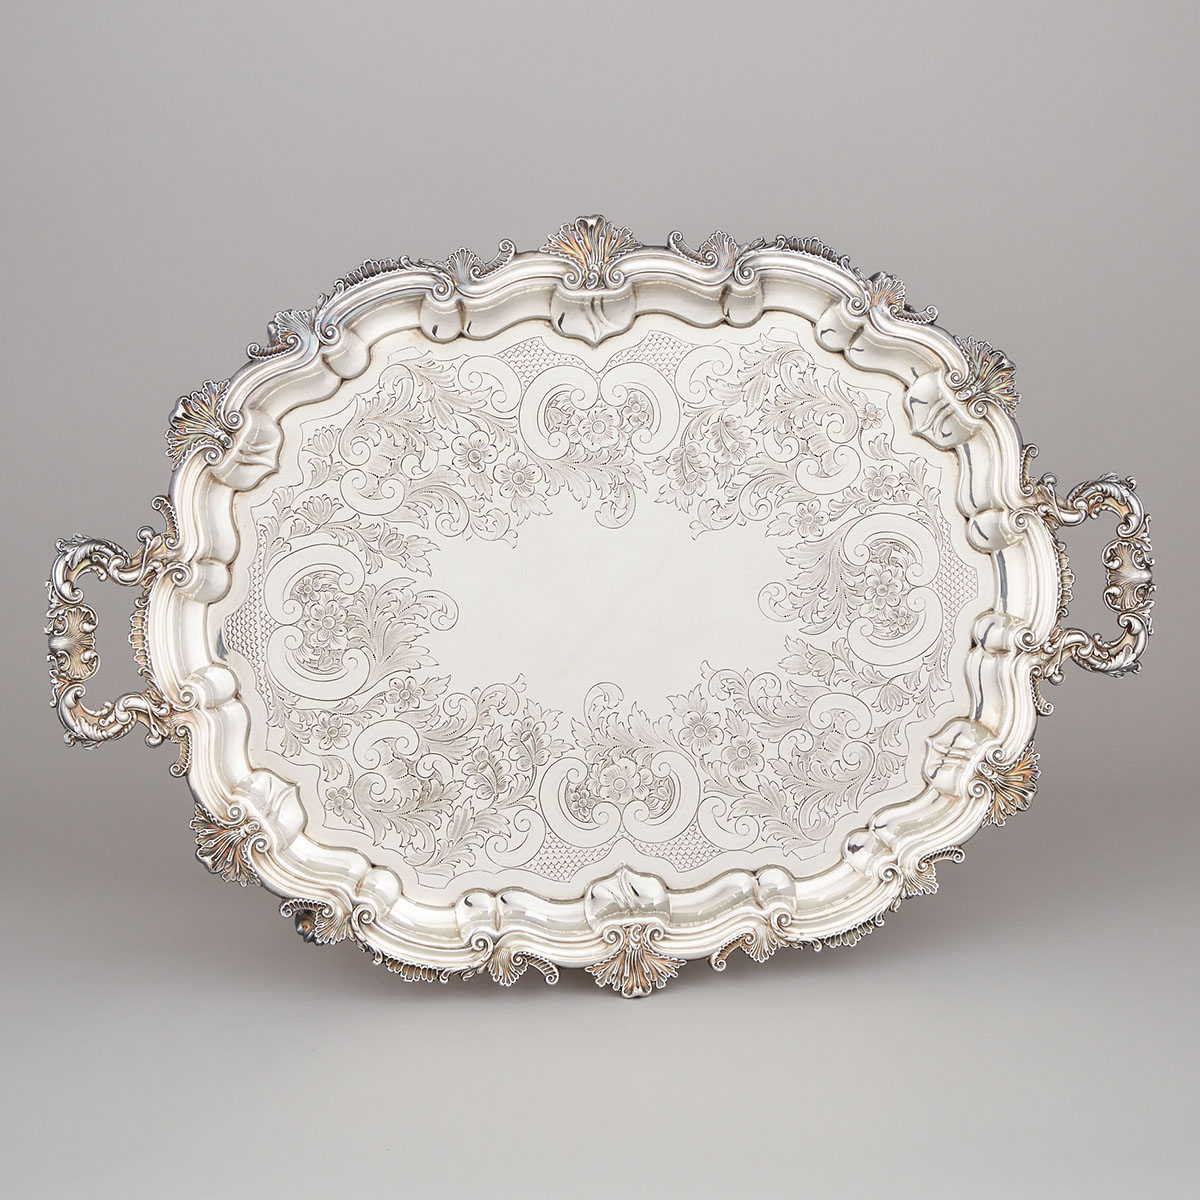 English ‘Regency’ Silver Plated Two-Handled Serving Tray, Ellis-Barker Silver Co. for Henry Birks & Sons, 20th century